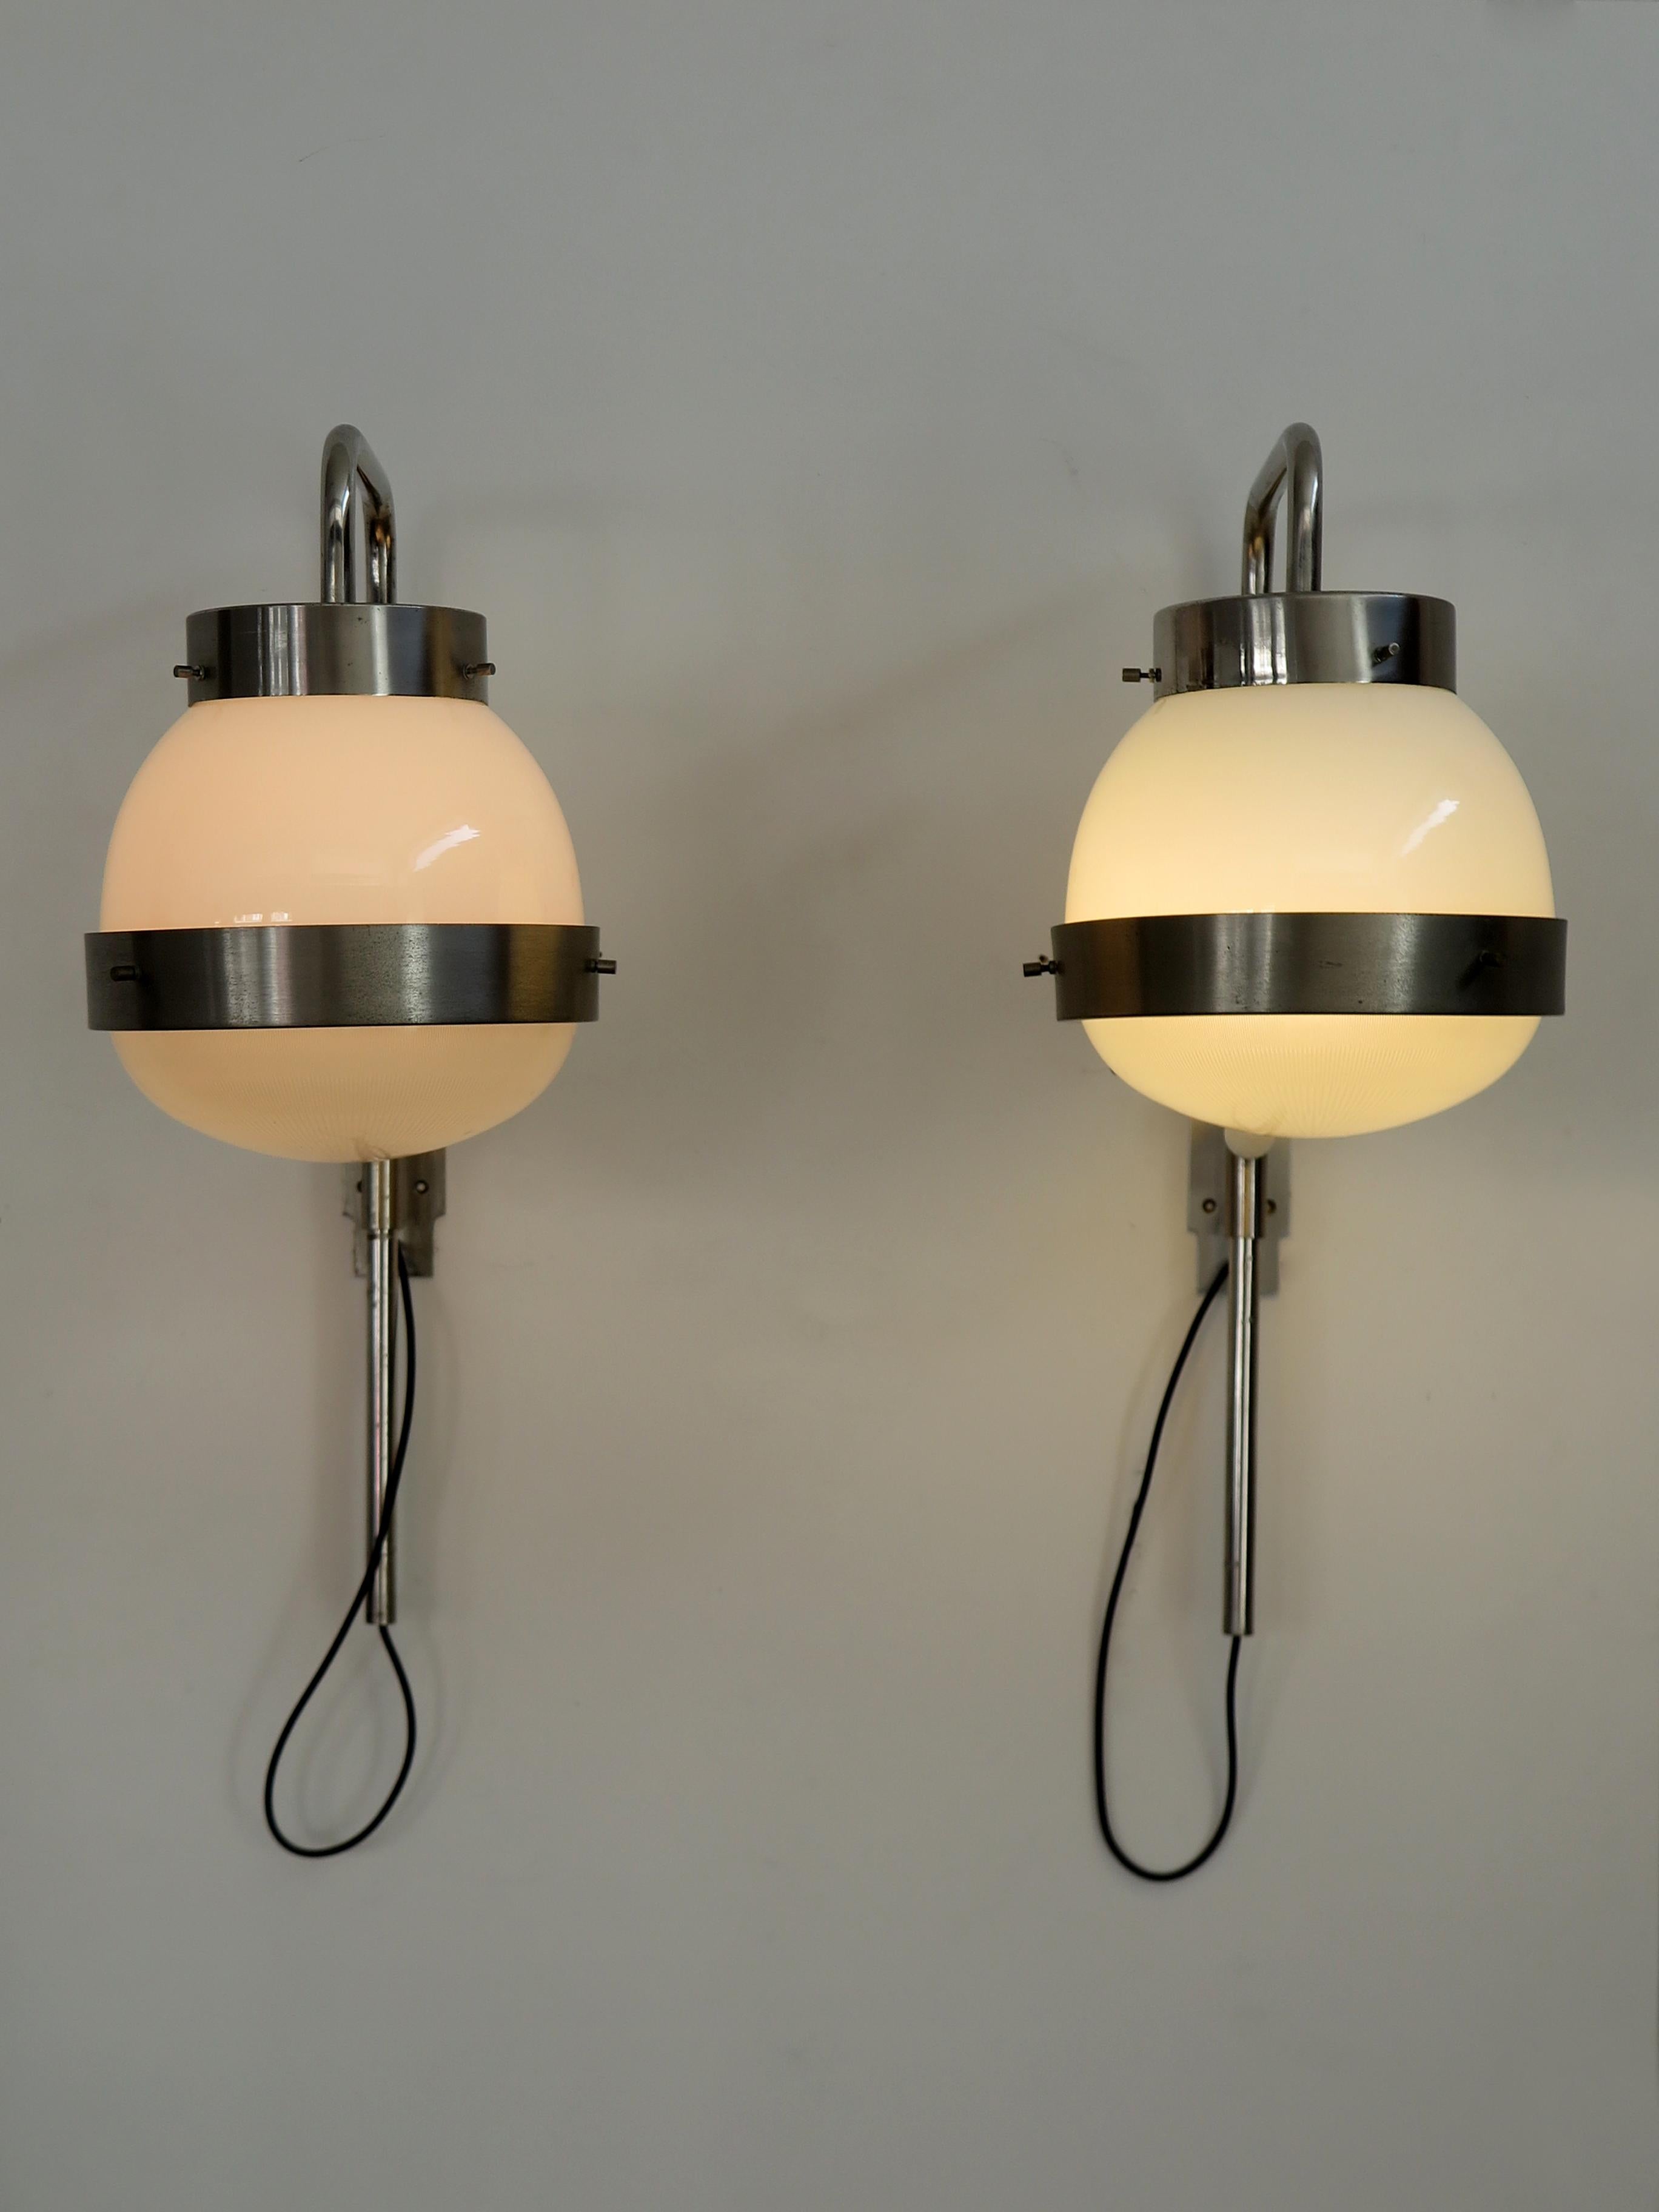 Italian amazing sconces wall lamps set ofv two model Delta designed by Sergio Mazza and produced by Artemide, adjustable in height, in nickel-plated, lower part in pressed crystal, 1960s.
XII Triennale.

Please note that the lamps are original of